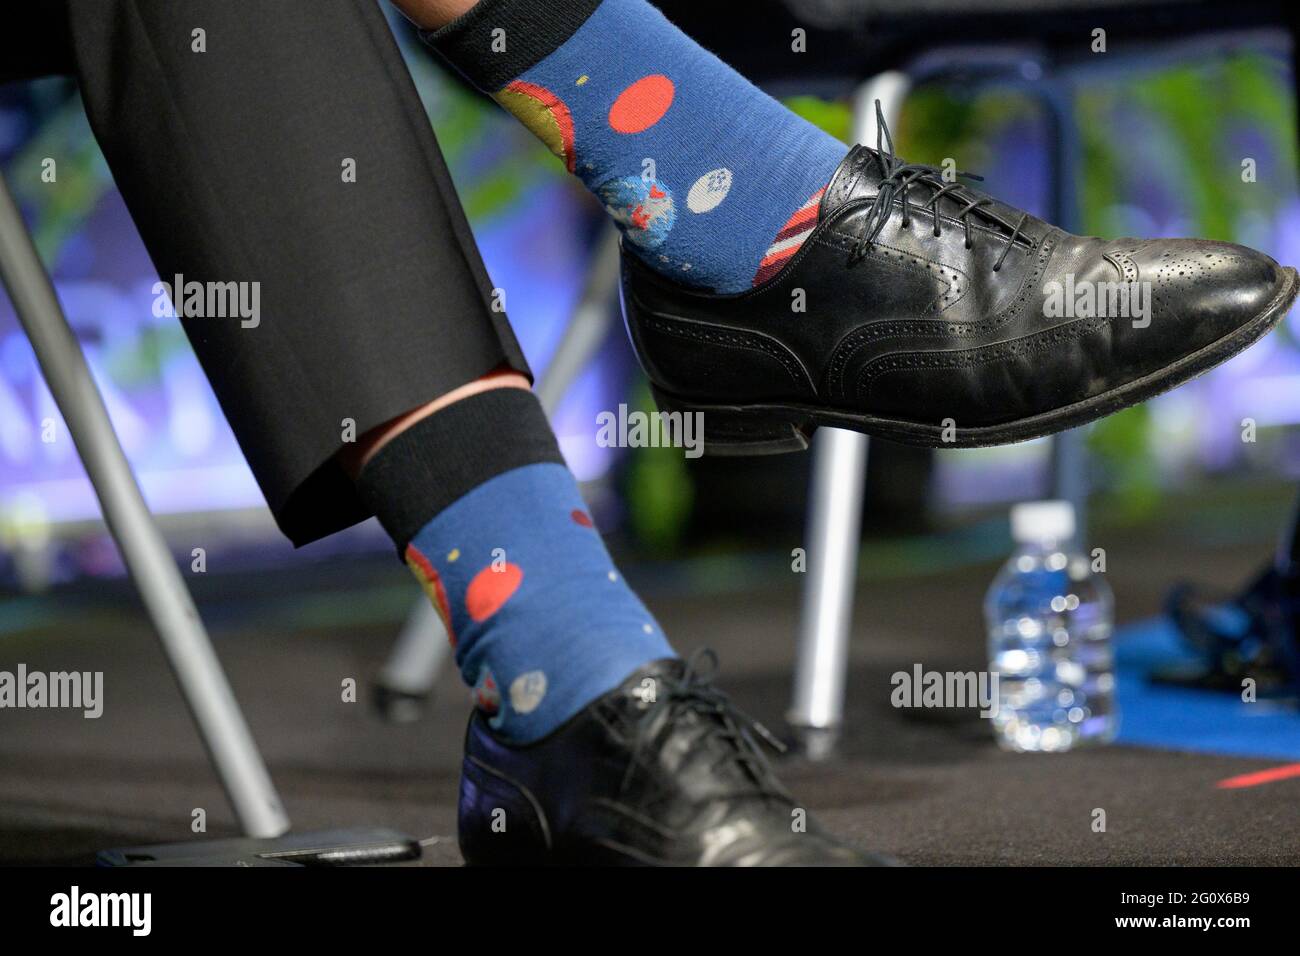 Washingon DC, USA. June 2 2021: The socks of NASA Associate Administrator for Science Thomas Zurbuchen are seen as he answers a reporter's question during a media gaggle, on Wednesday, June 2, 2021, at NASA Headquarters Mary W. Jackson Building in Washington. Credit: UPI/Alamy Live News Stock Photo